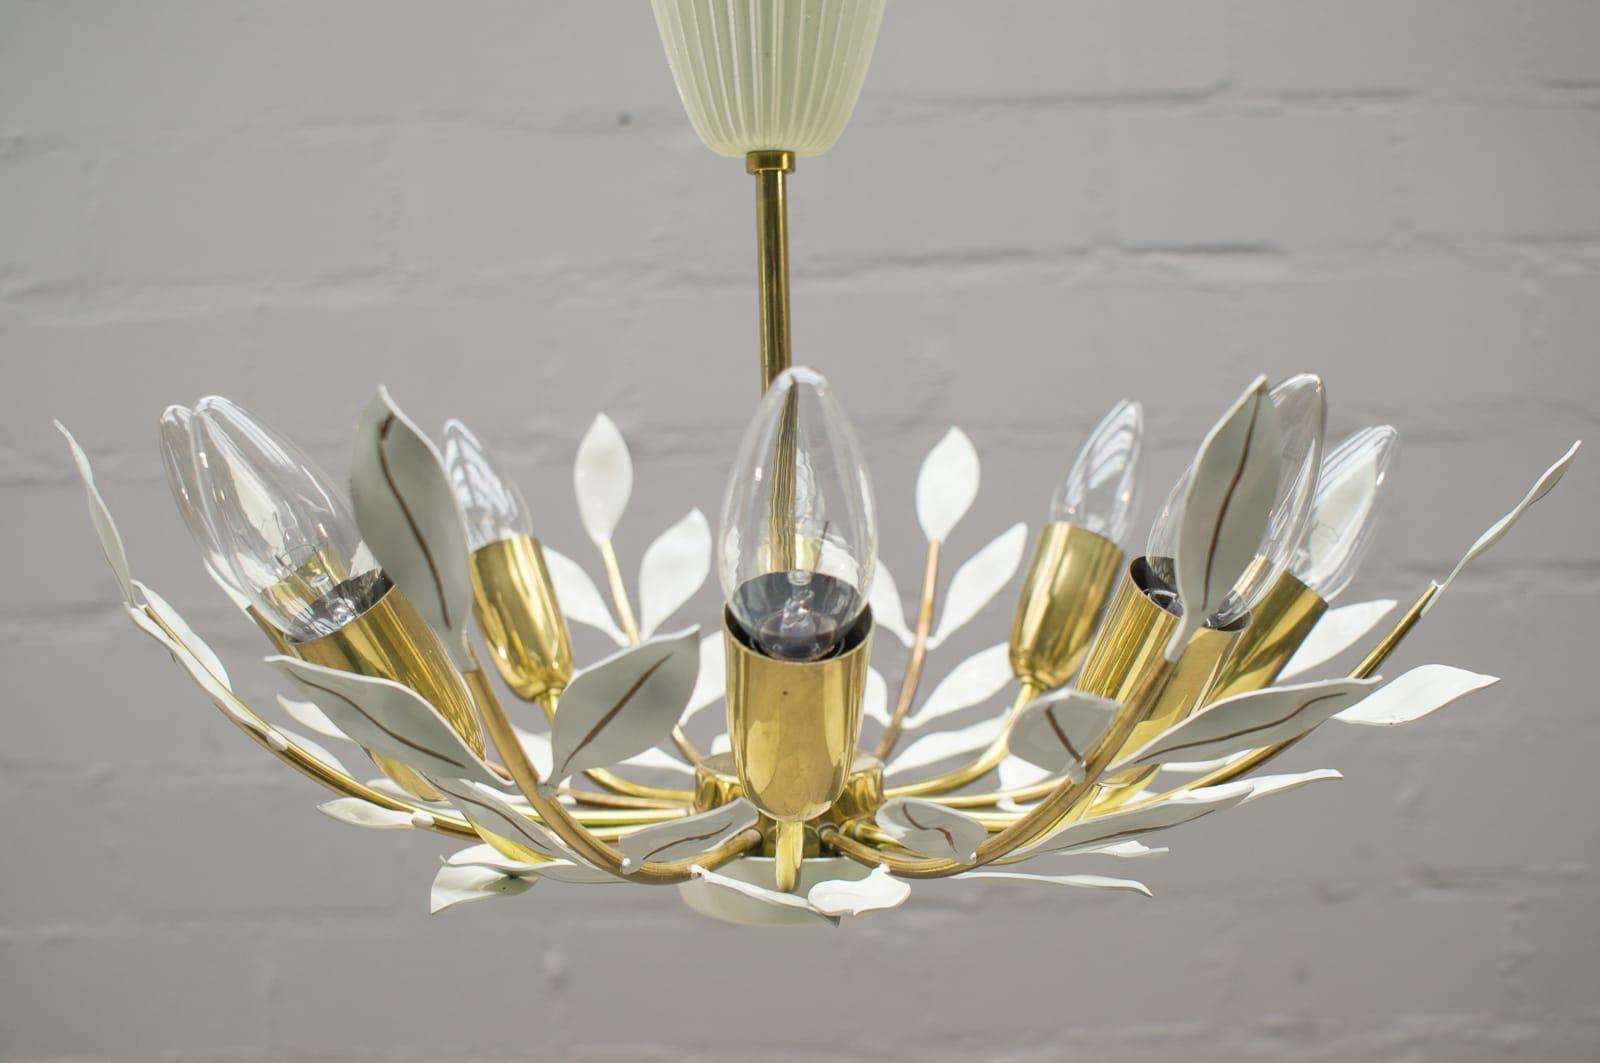 Very elegant ceiling lamp. Manufactured by Vereinigte Werkstätten Munich, Germany in 1960s. 

Executed in massive brass. The chandelier needs 8 x E14 Edison screw fit bulbs.

They are wired, in working condition and run both on 110 / 230 volt.